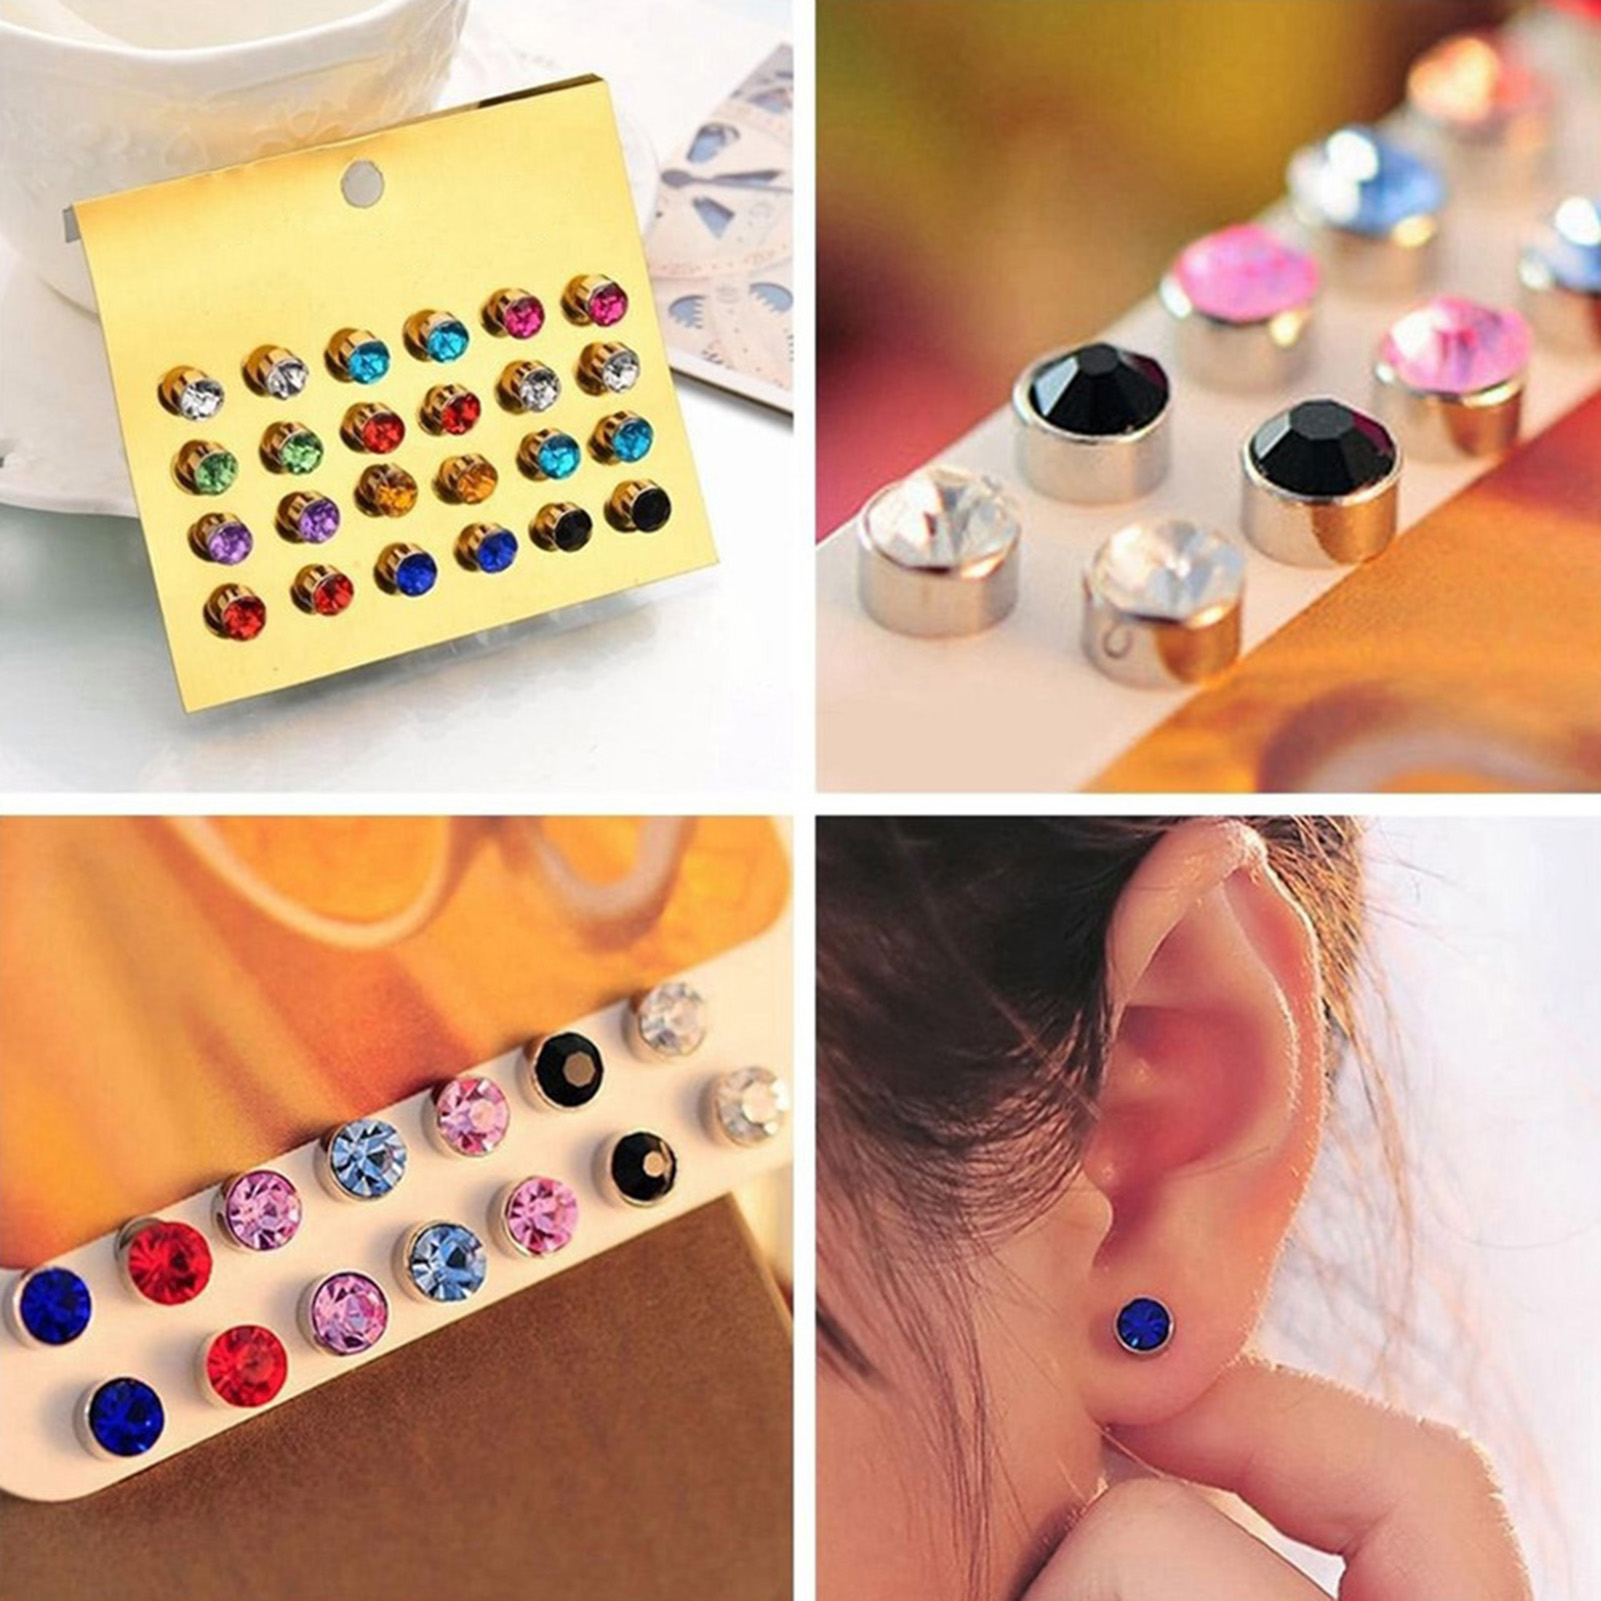 Naierhg 12Pcs/Set Earrings Nickel-free with Rhinestone Alloy Women Earring Jewelry for Birthday - image 4 of 7